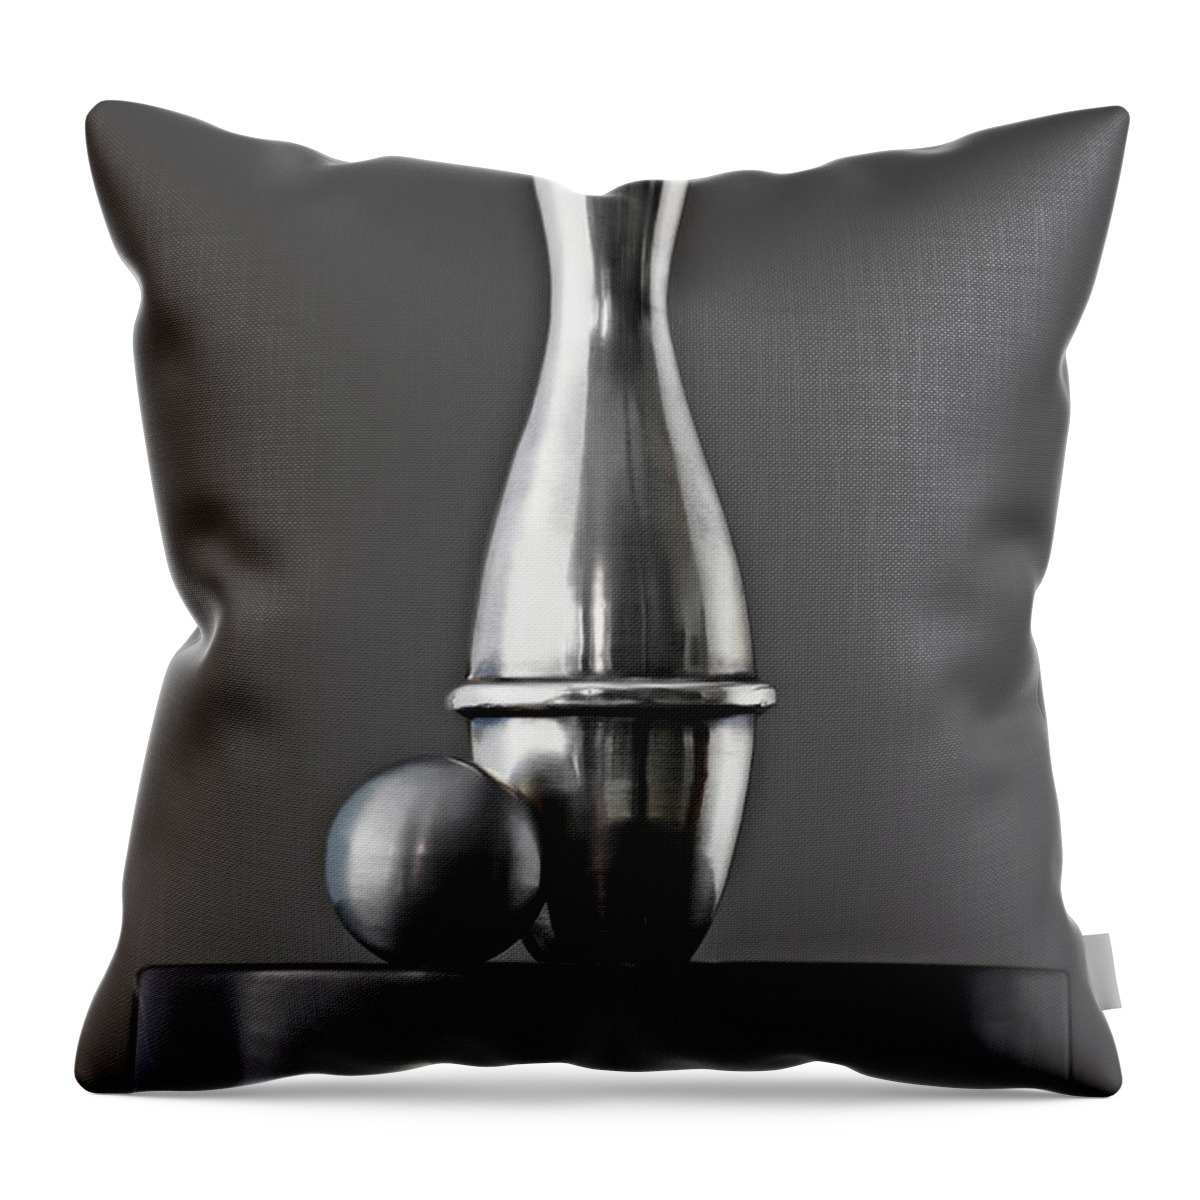 Two Objects Throw Pillow featuring the photograph Bowling Trophy by David Muir